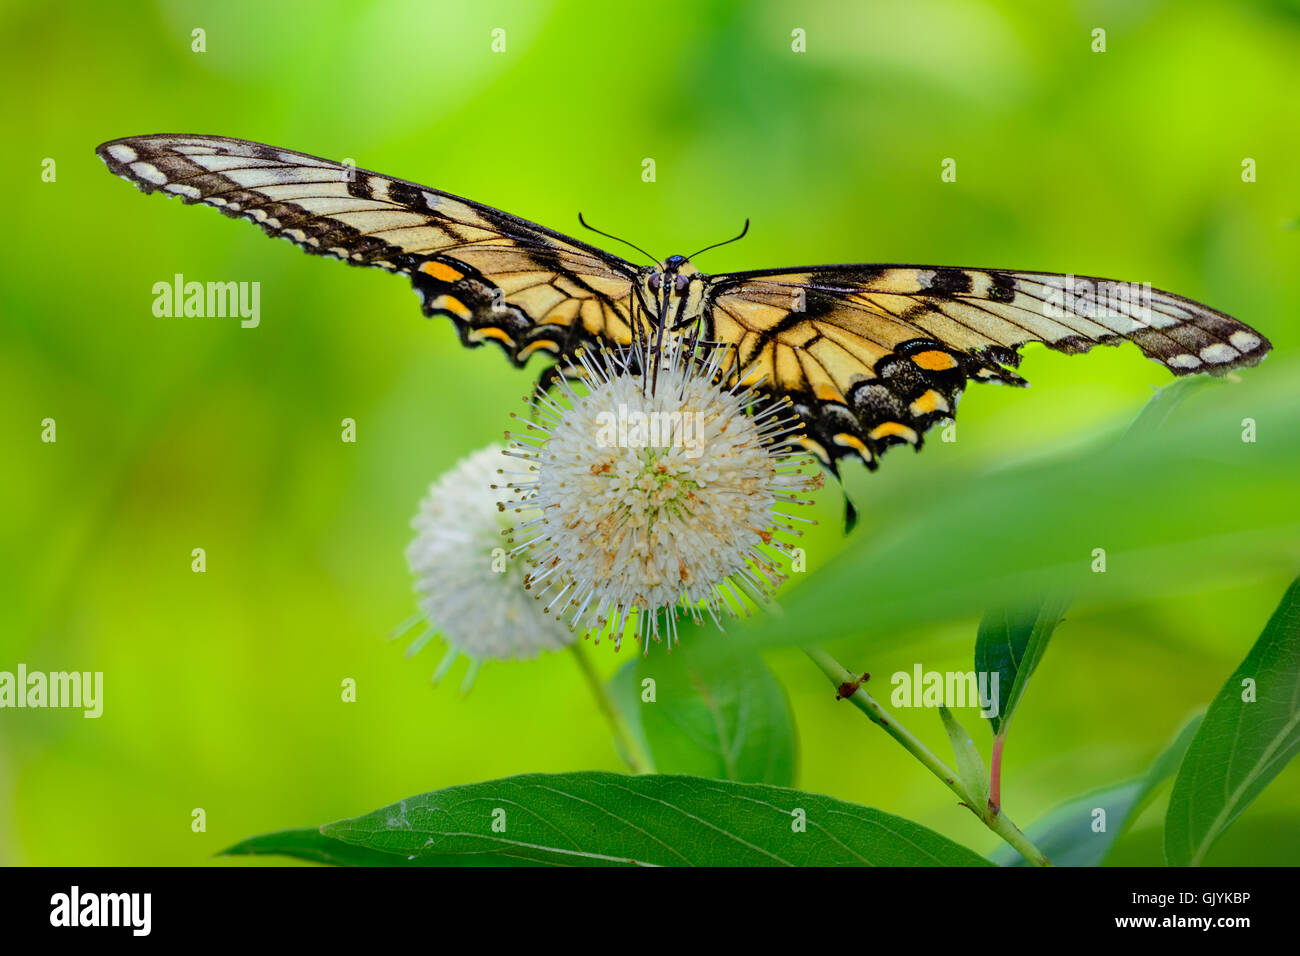 Eastern tiger swallowtail (Papilio glaucus) butterfly on flower. blurred green background front view Stock Photo